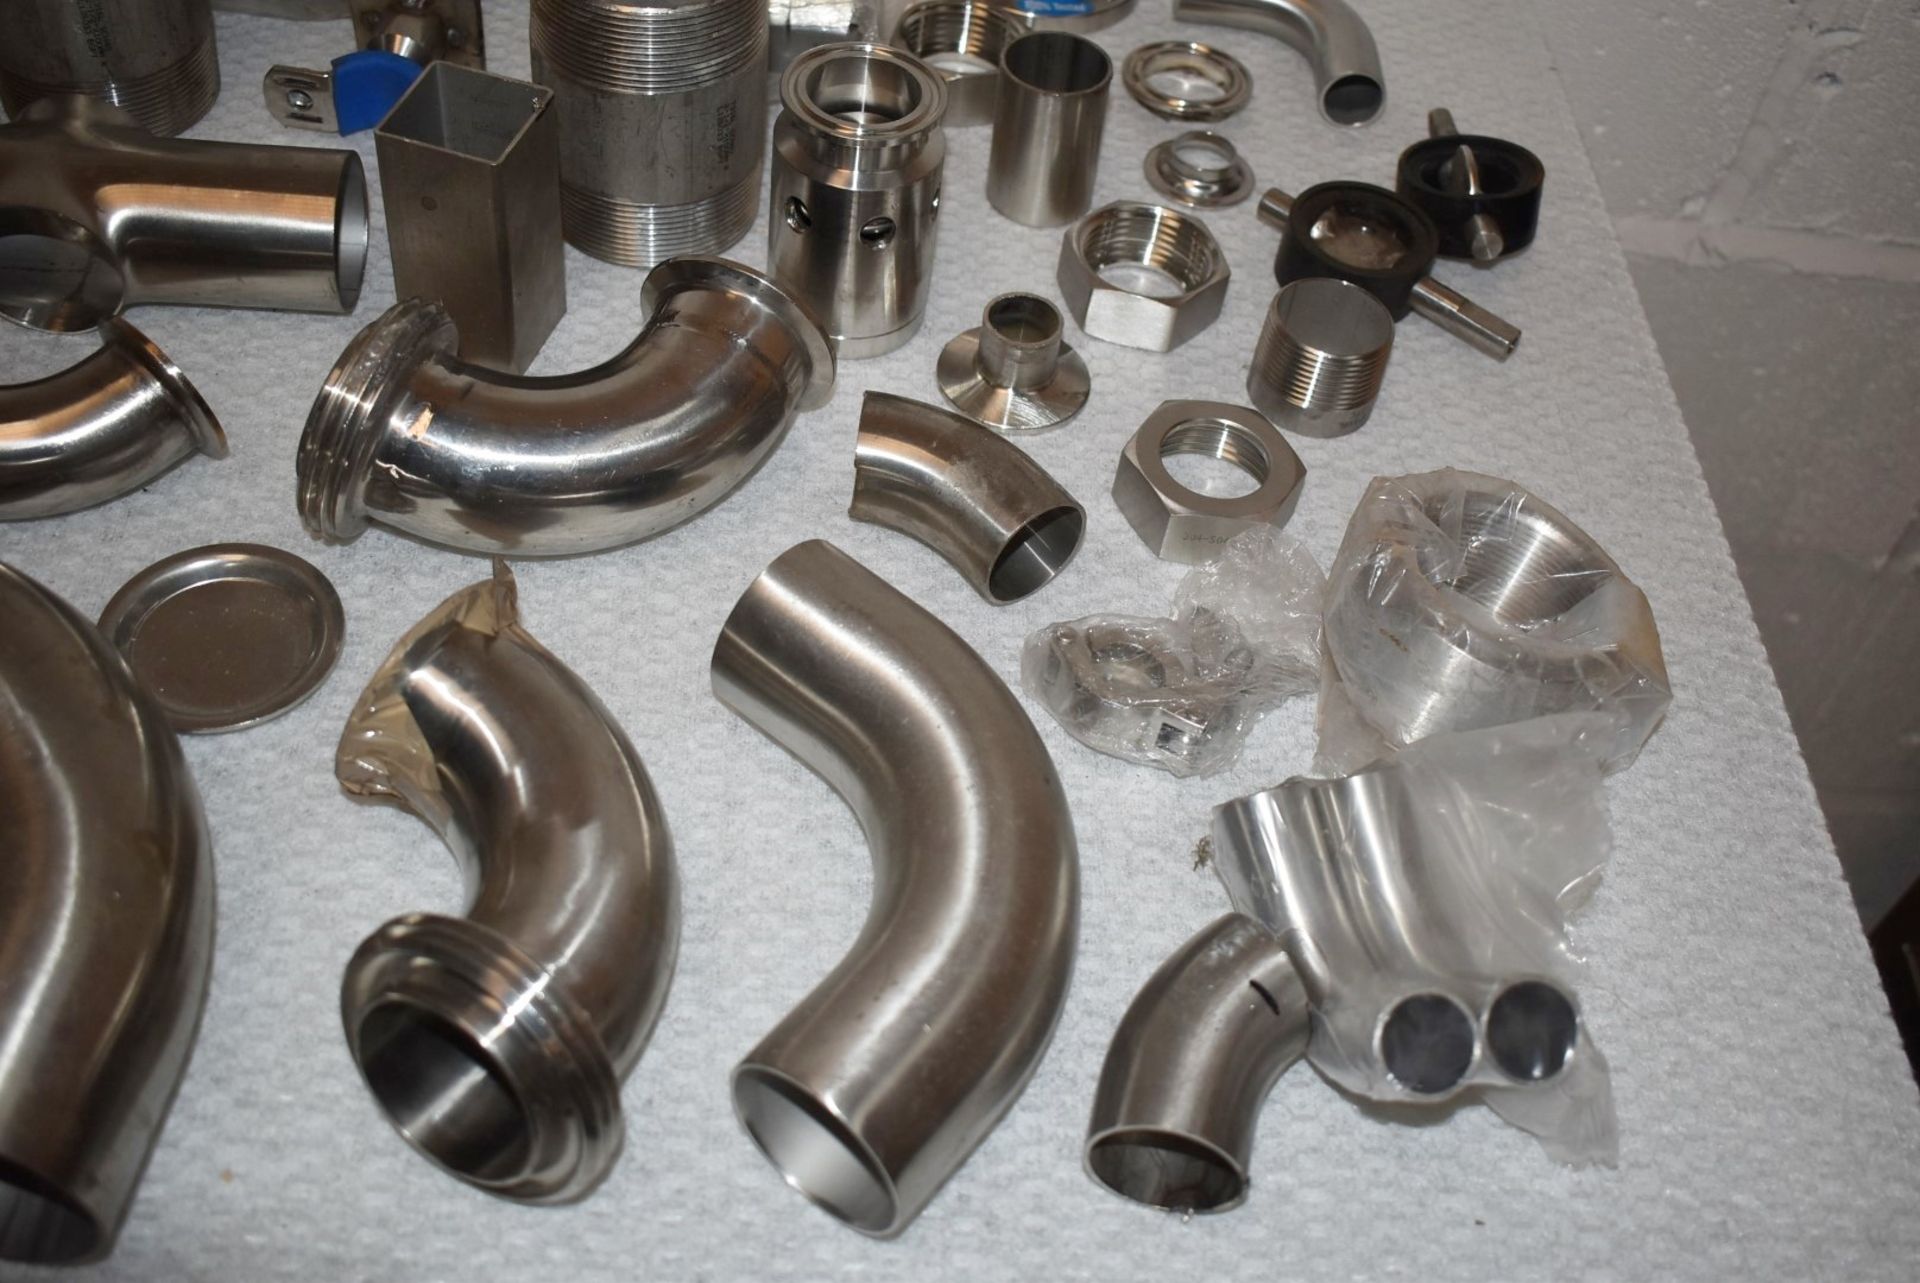 Assorted Job Lot of Stainless Steel Fittings For Brewery Equipment - Includes Approx 60 Pieces - - Image 11 of 17